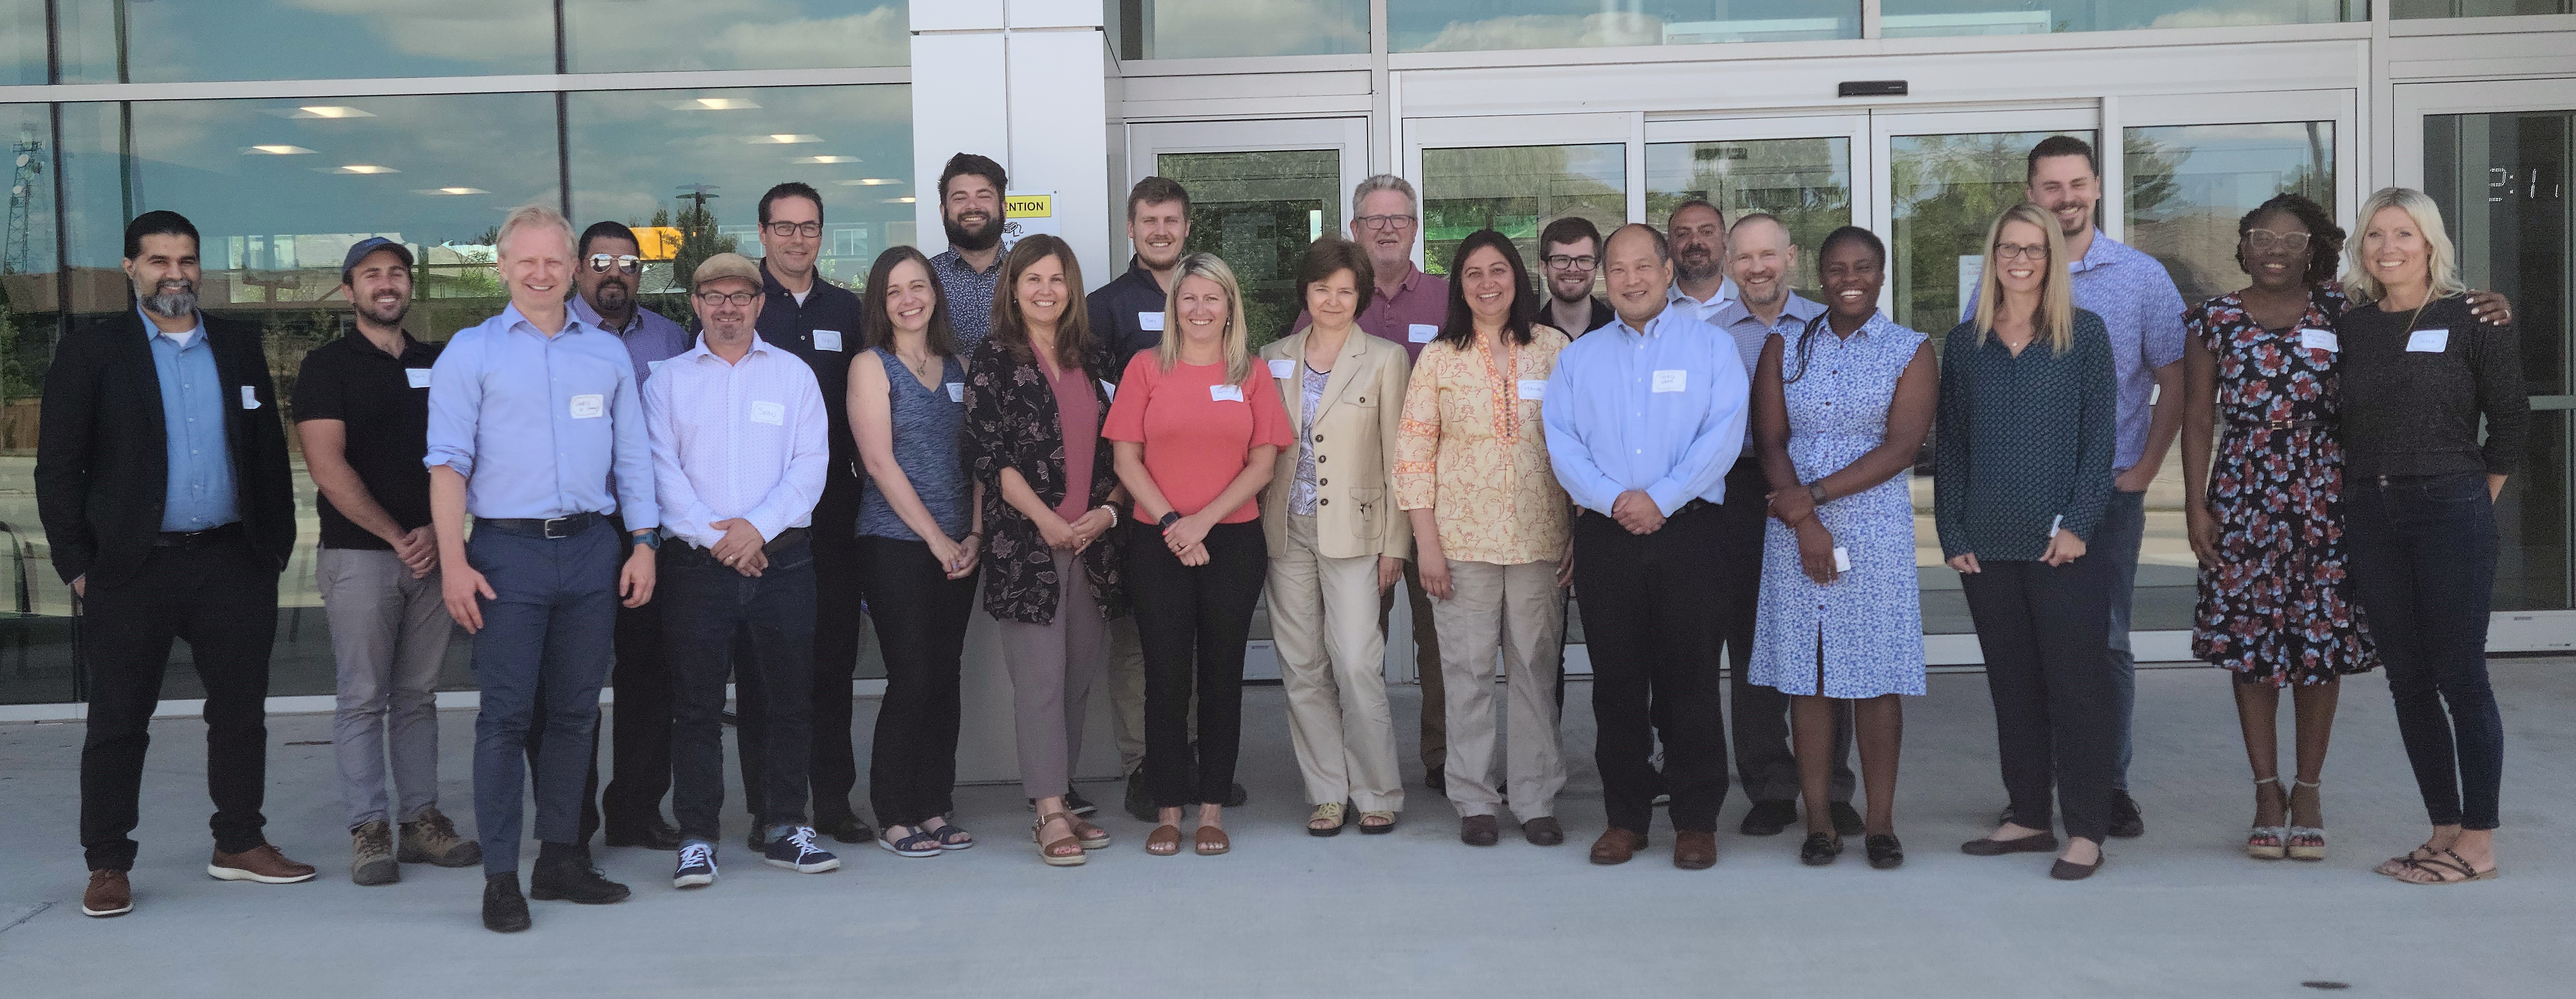 Niagara Region Cohort at the West Lincoln Community Centre – June 28, 2022